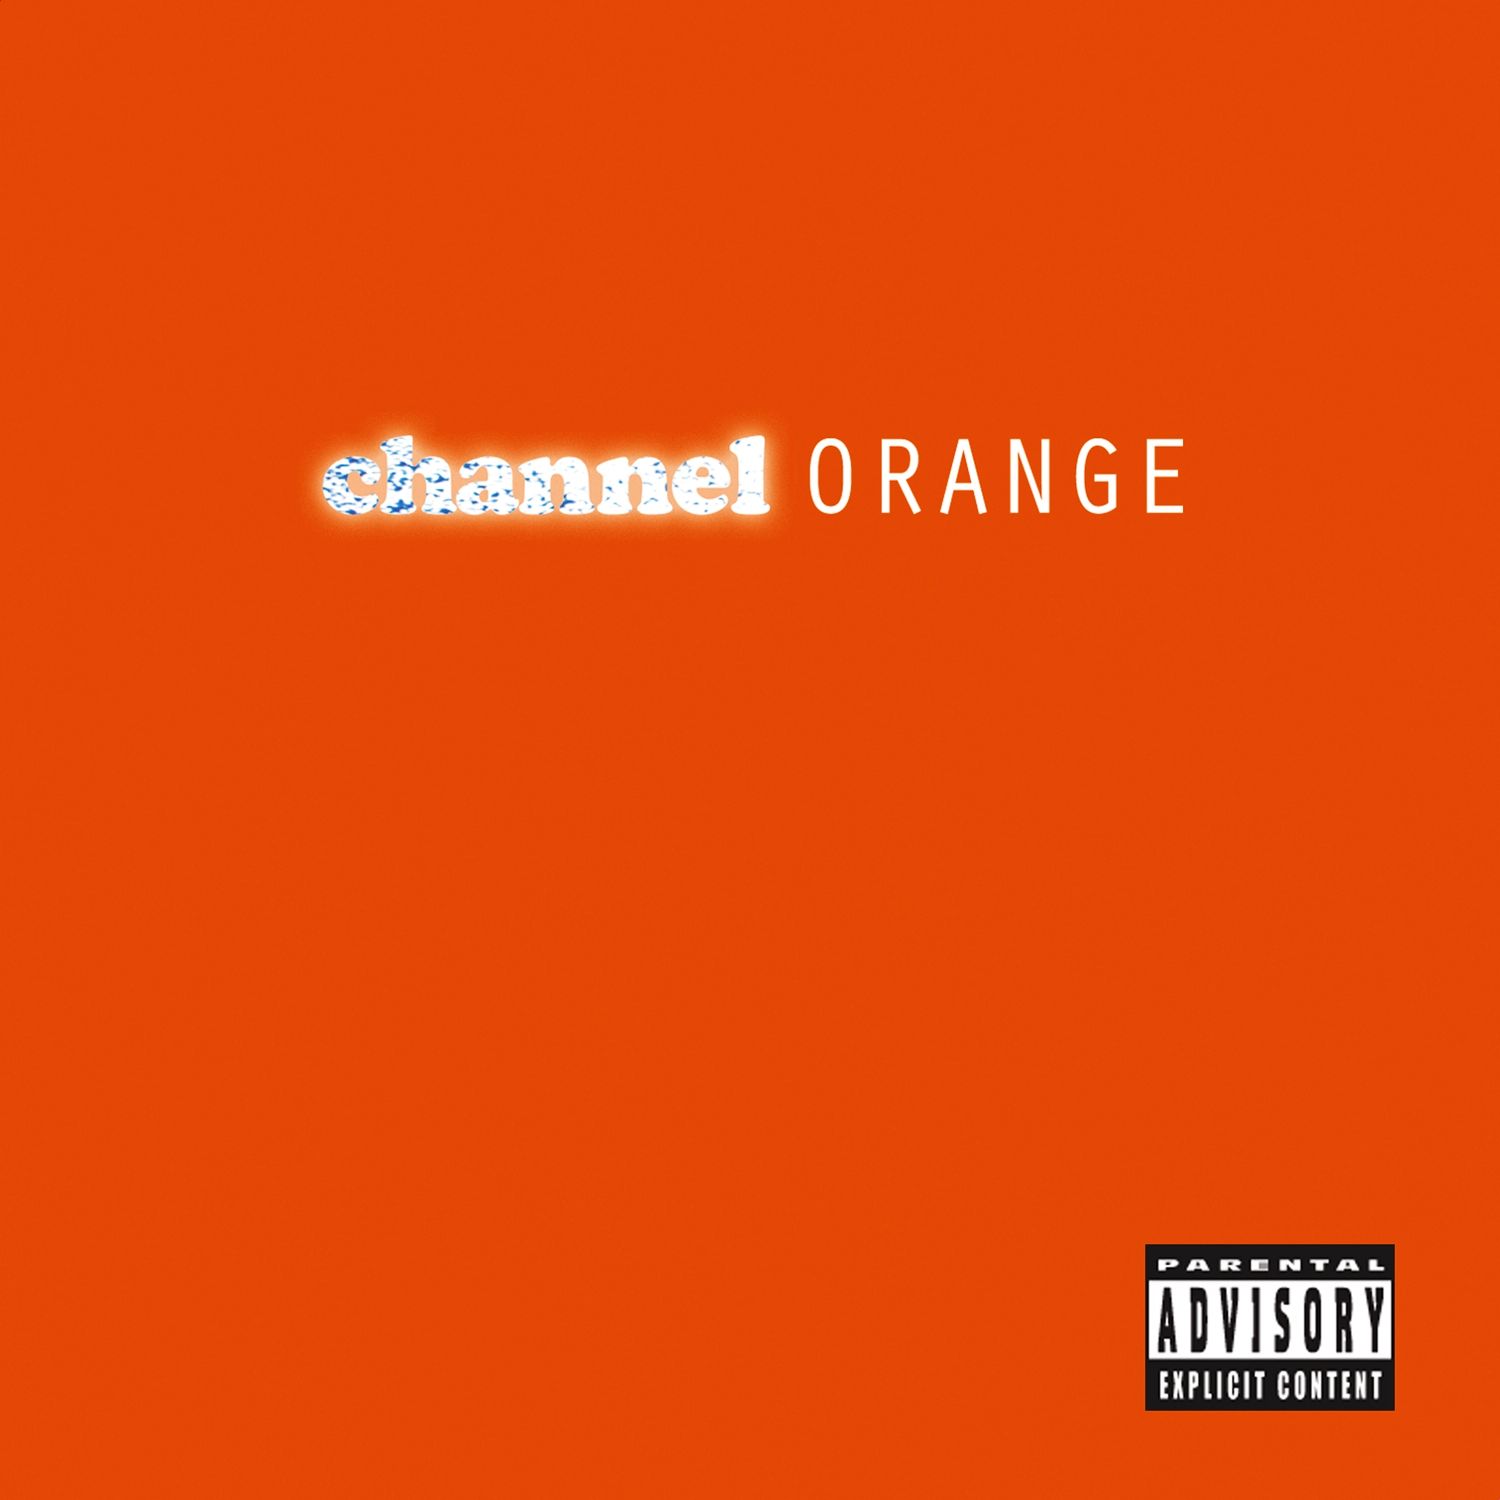 channel orange review track by track